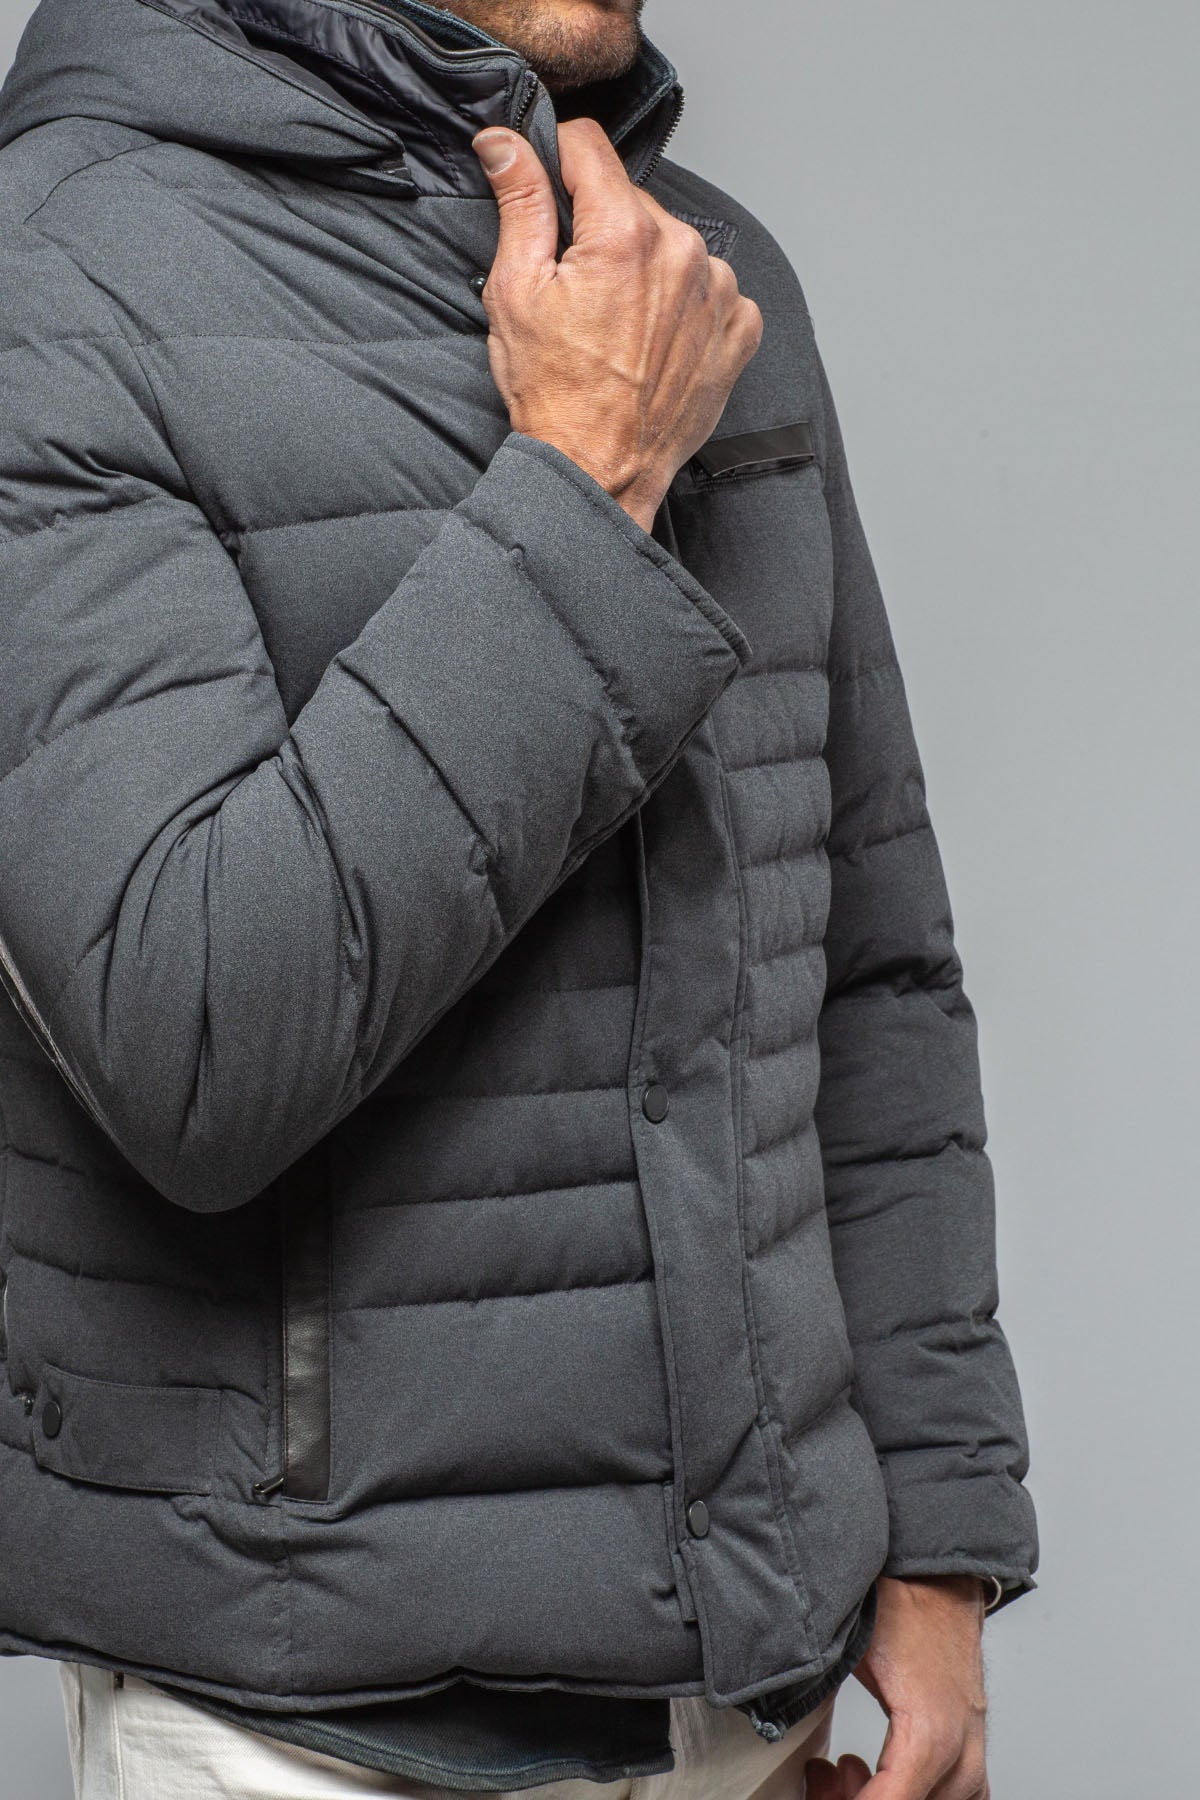 Albertville Down City Jacket | Warehouse - Mens - Outerwear - Cloth | Gimo's